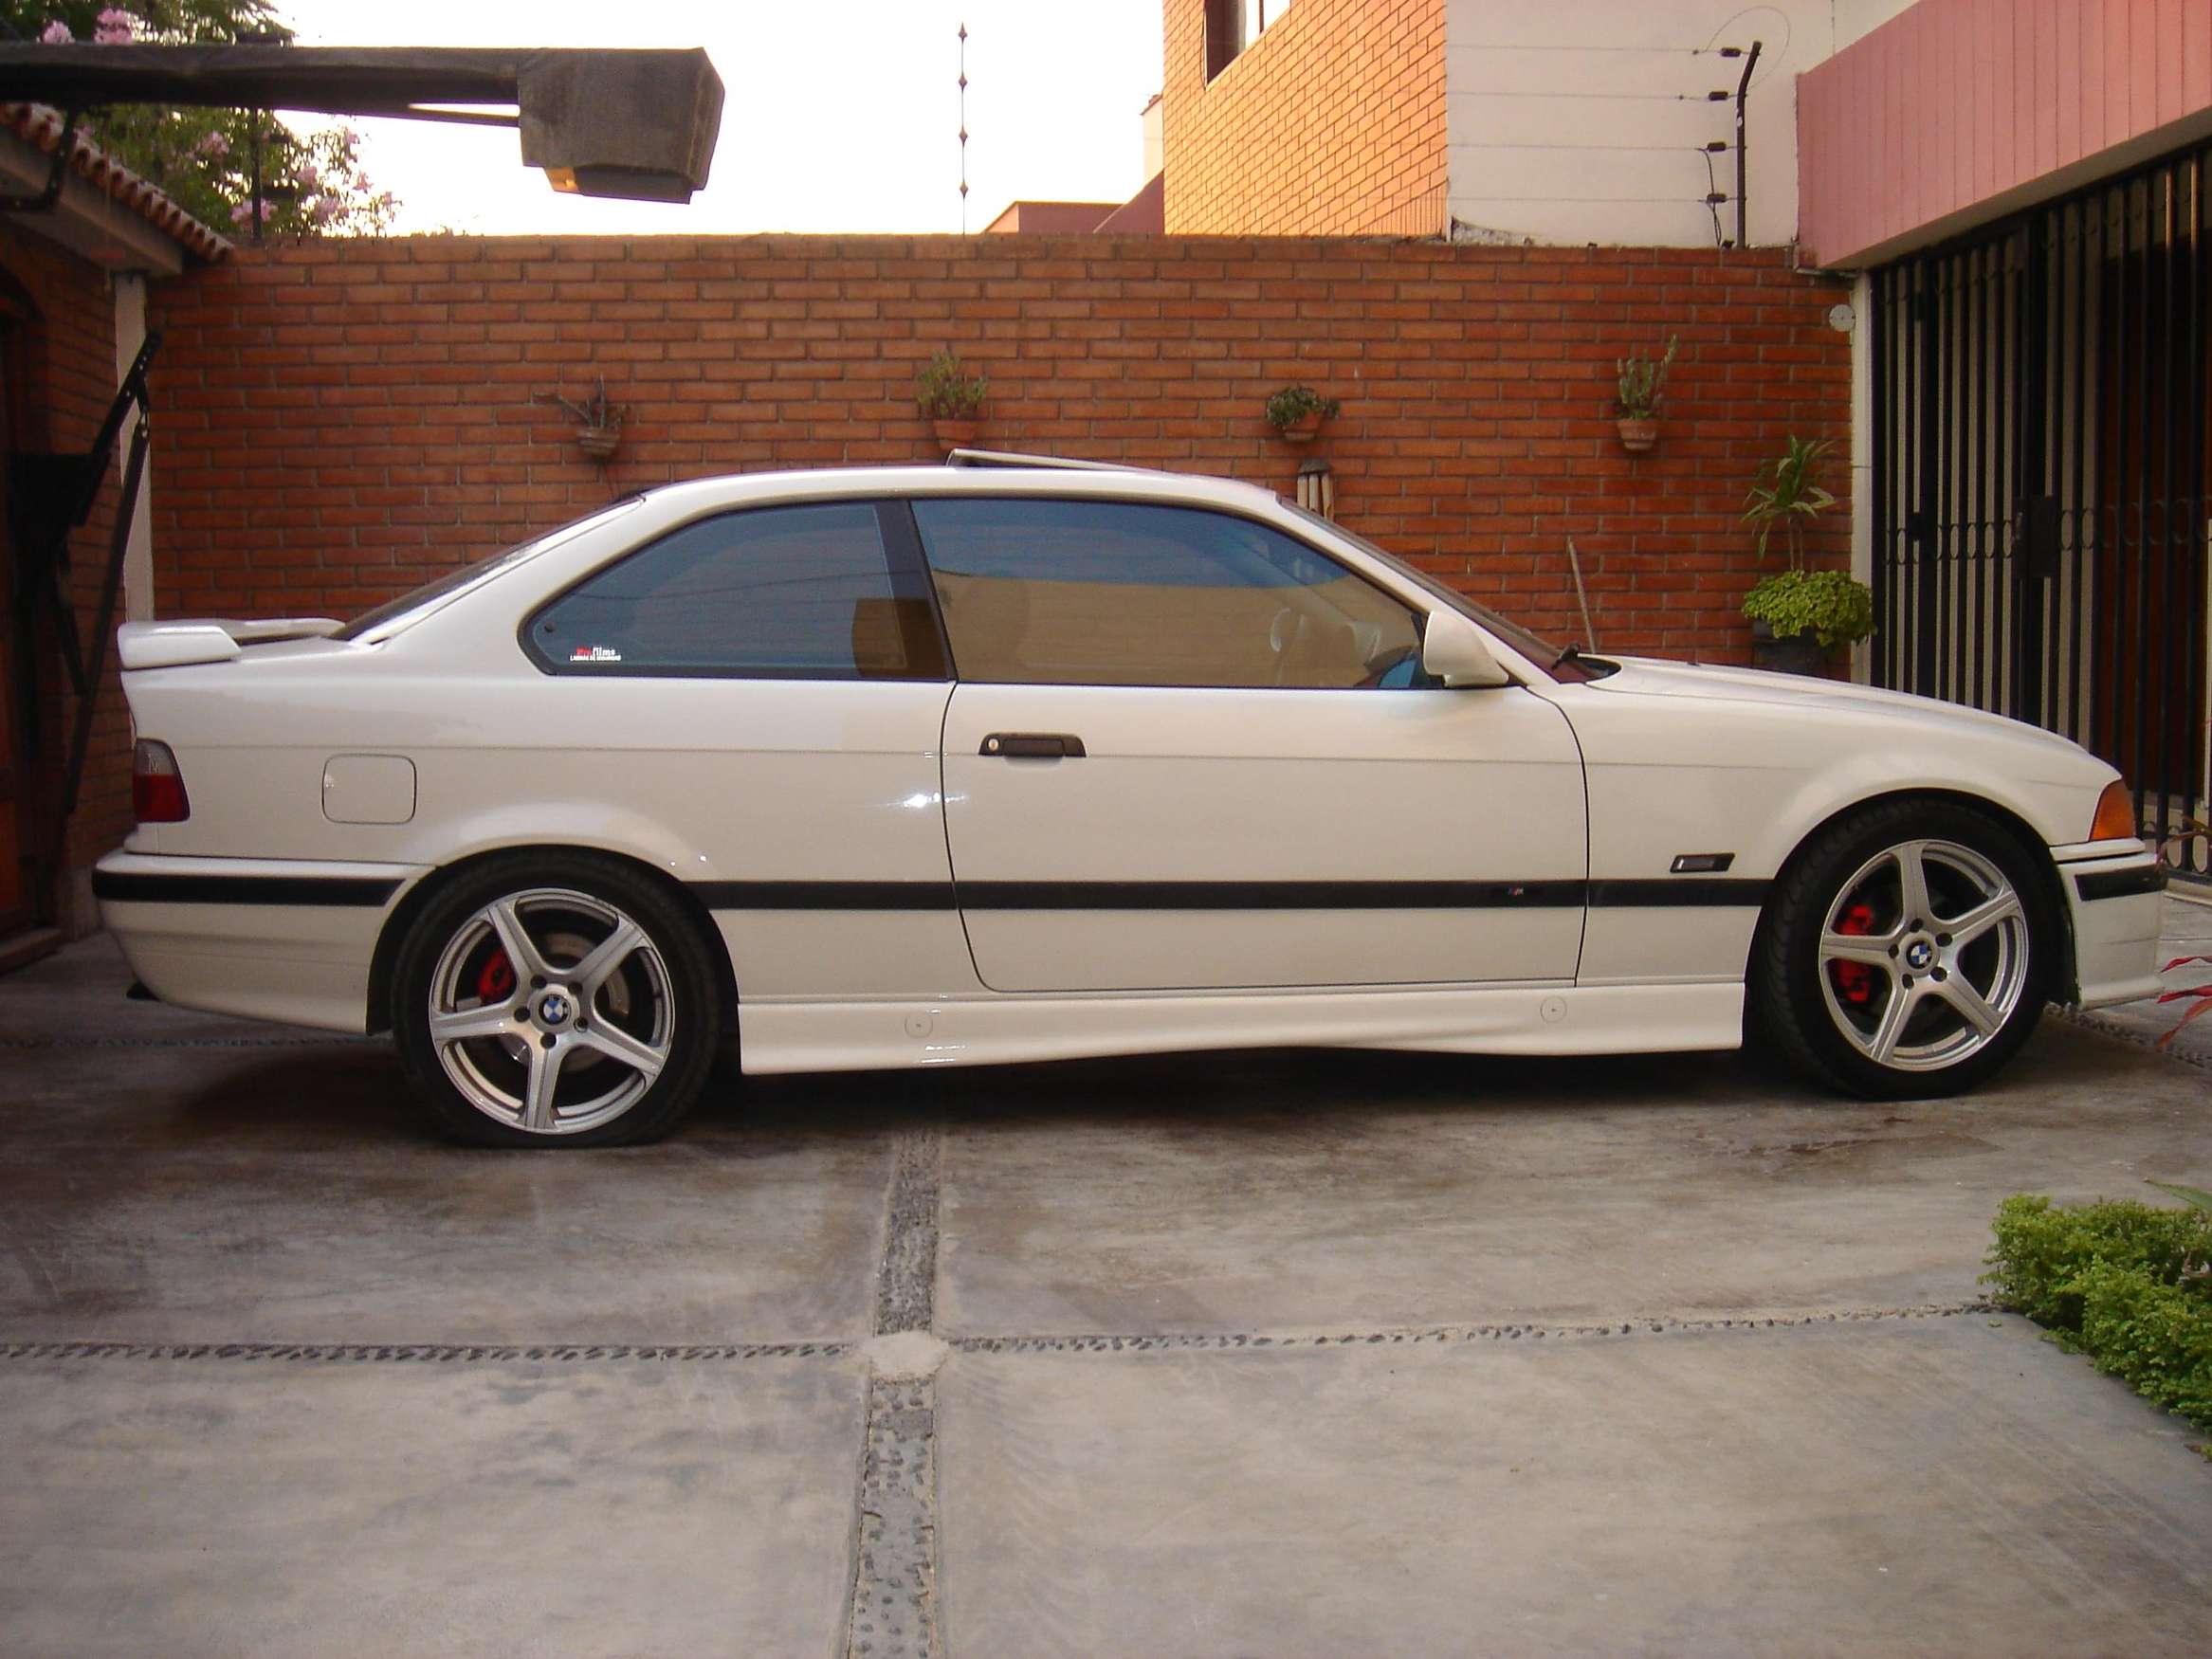 95 bmw 325is